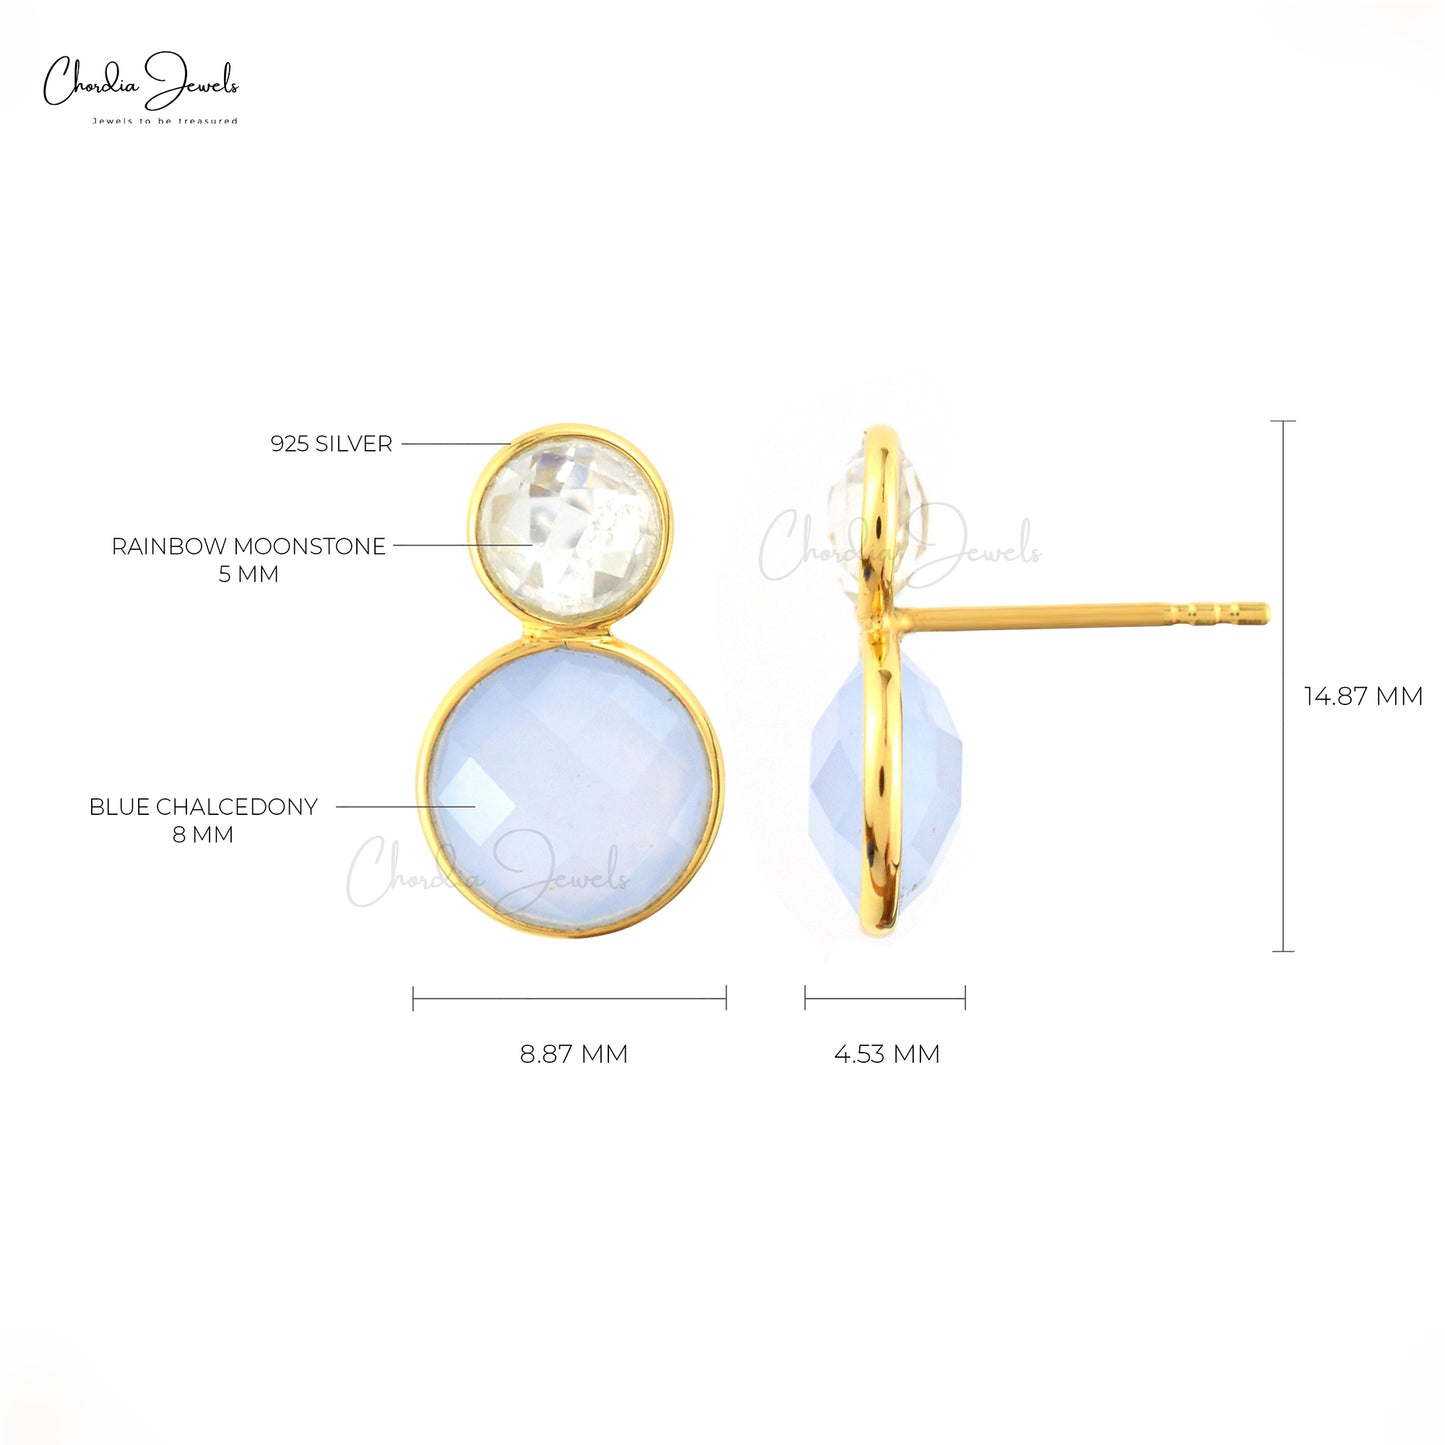 Load image into Gallery viewer, Genuine Blue Chalcedony With Rainbow Moonstone Earrings 925 Sterling Sliver Minimalist Trendy Jewelry At Discount Price
